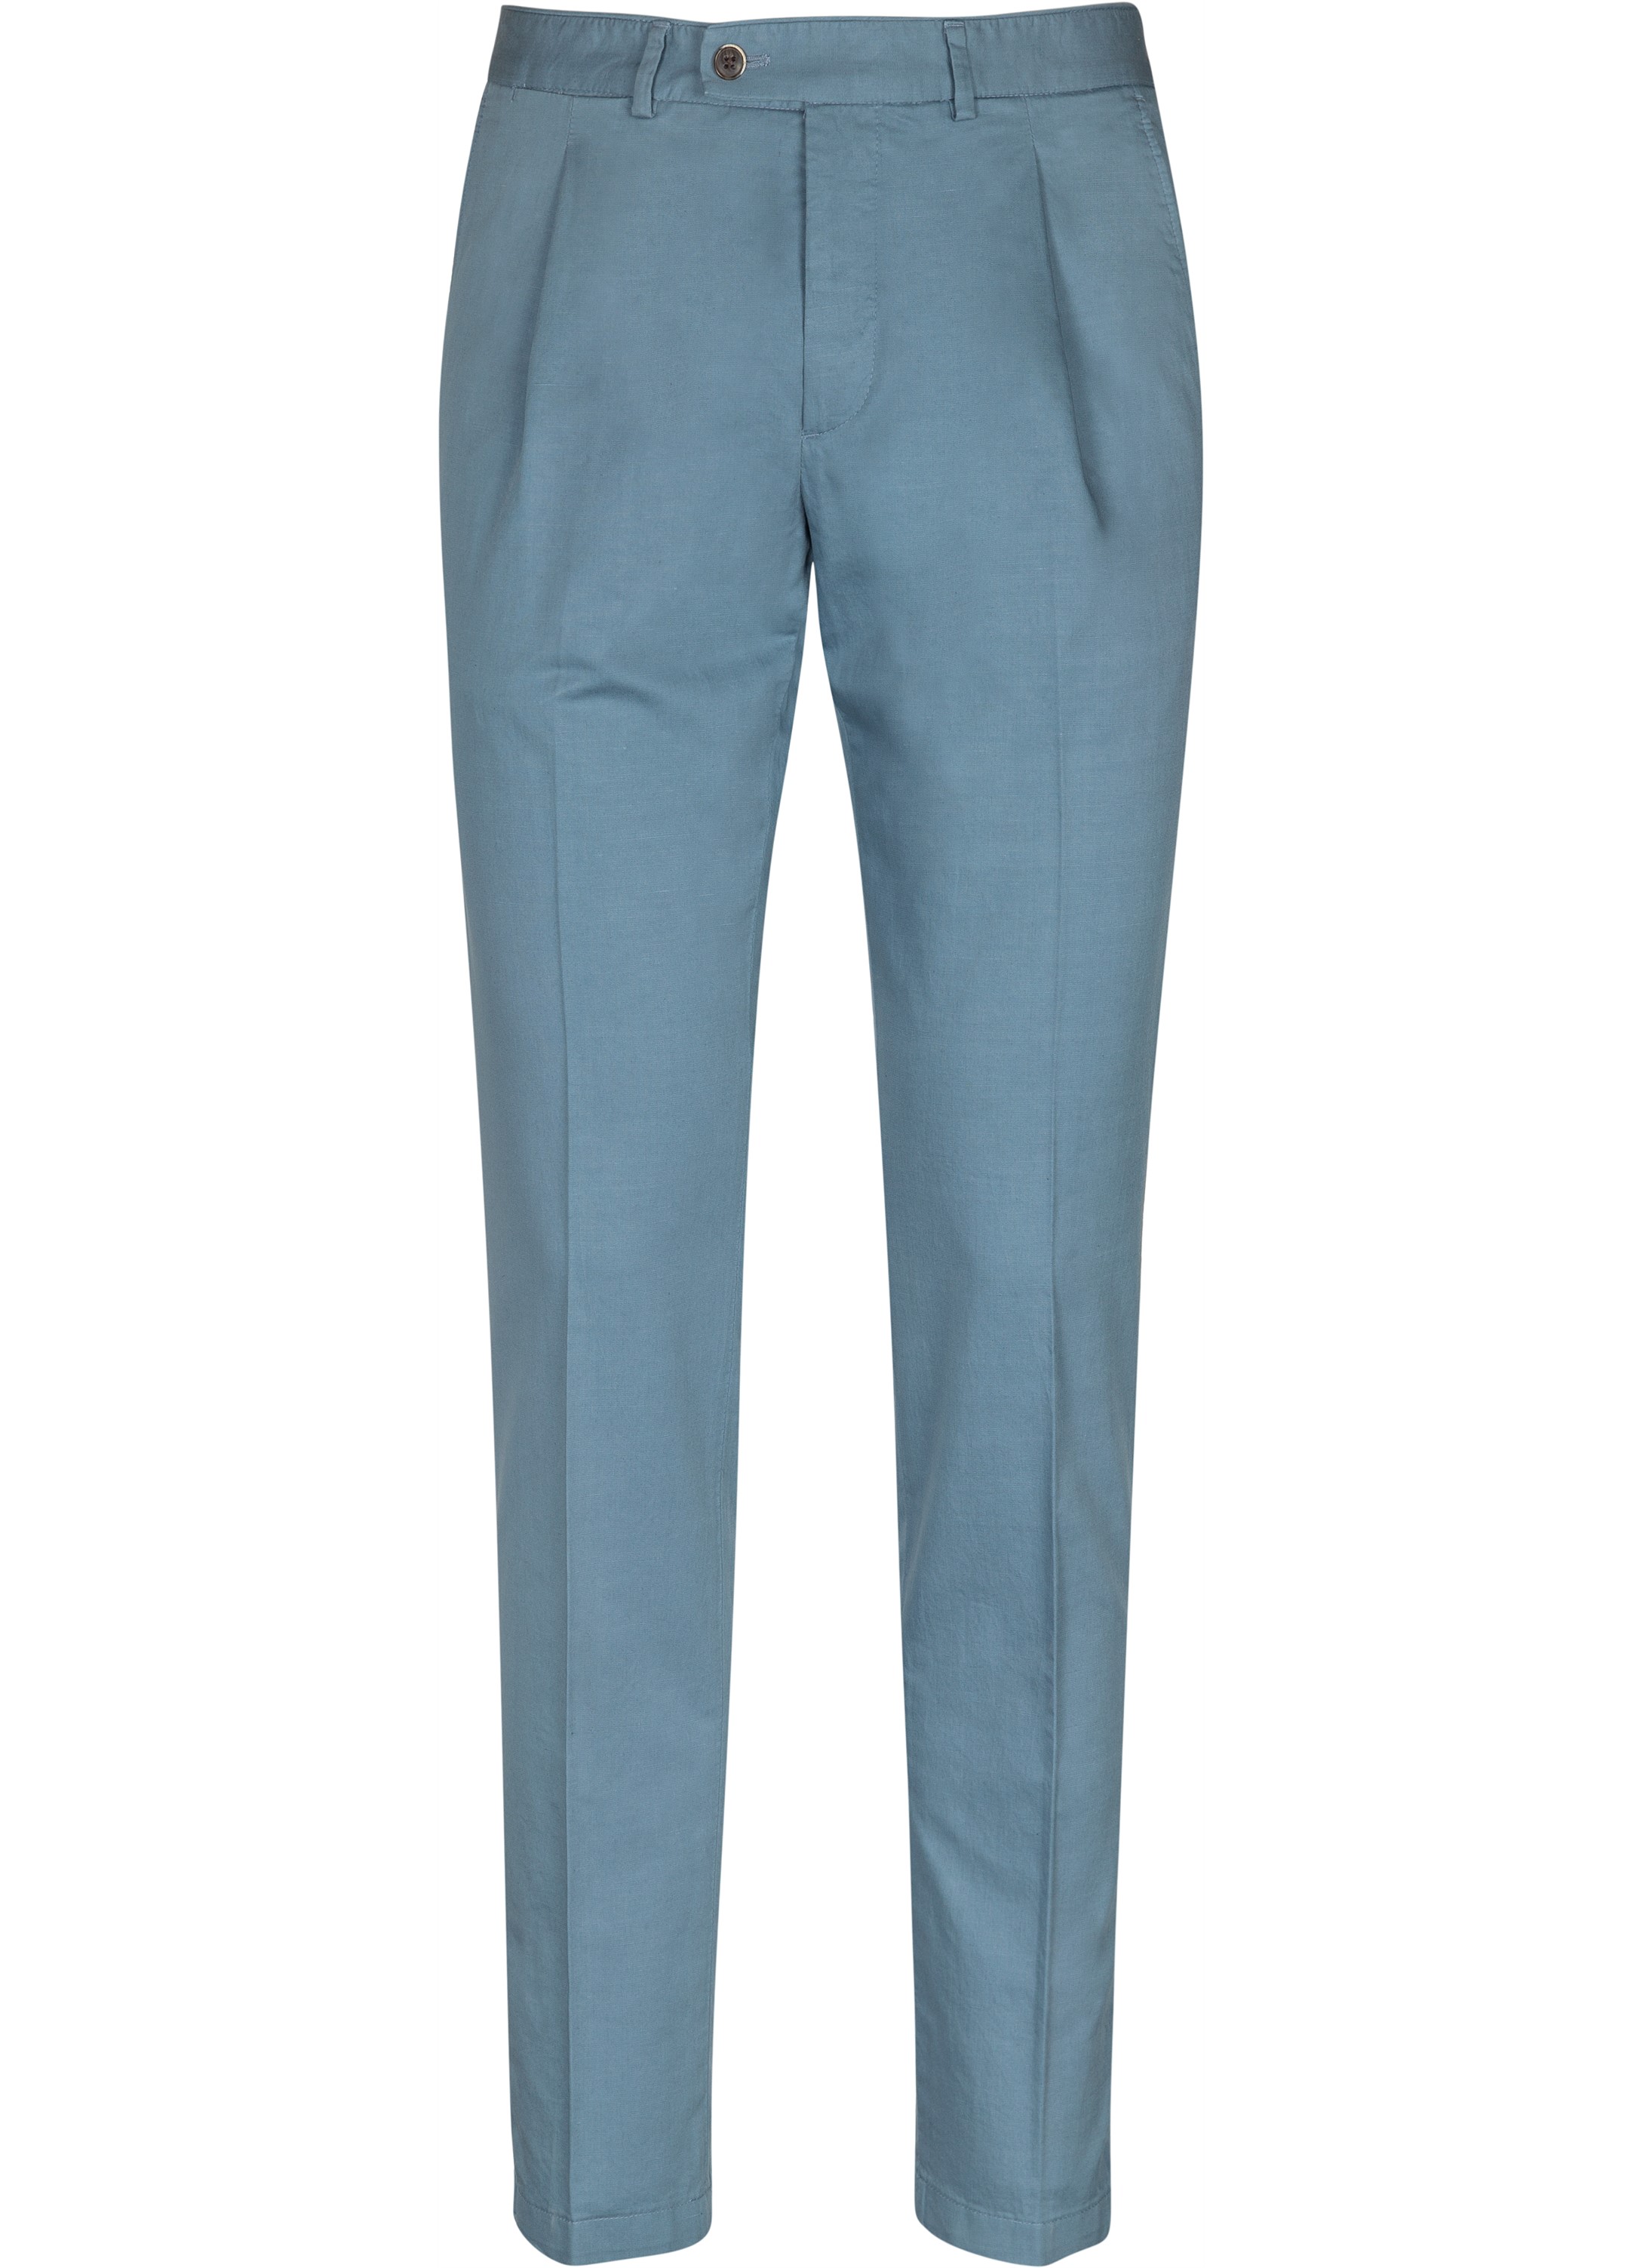 Light Blue Trousers B414i | Suitsupply Online Store